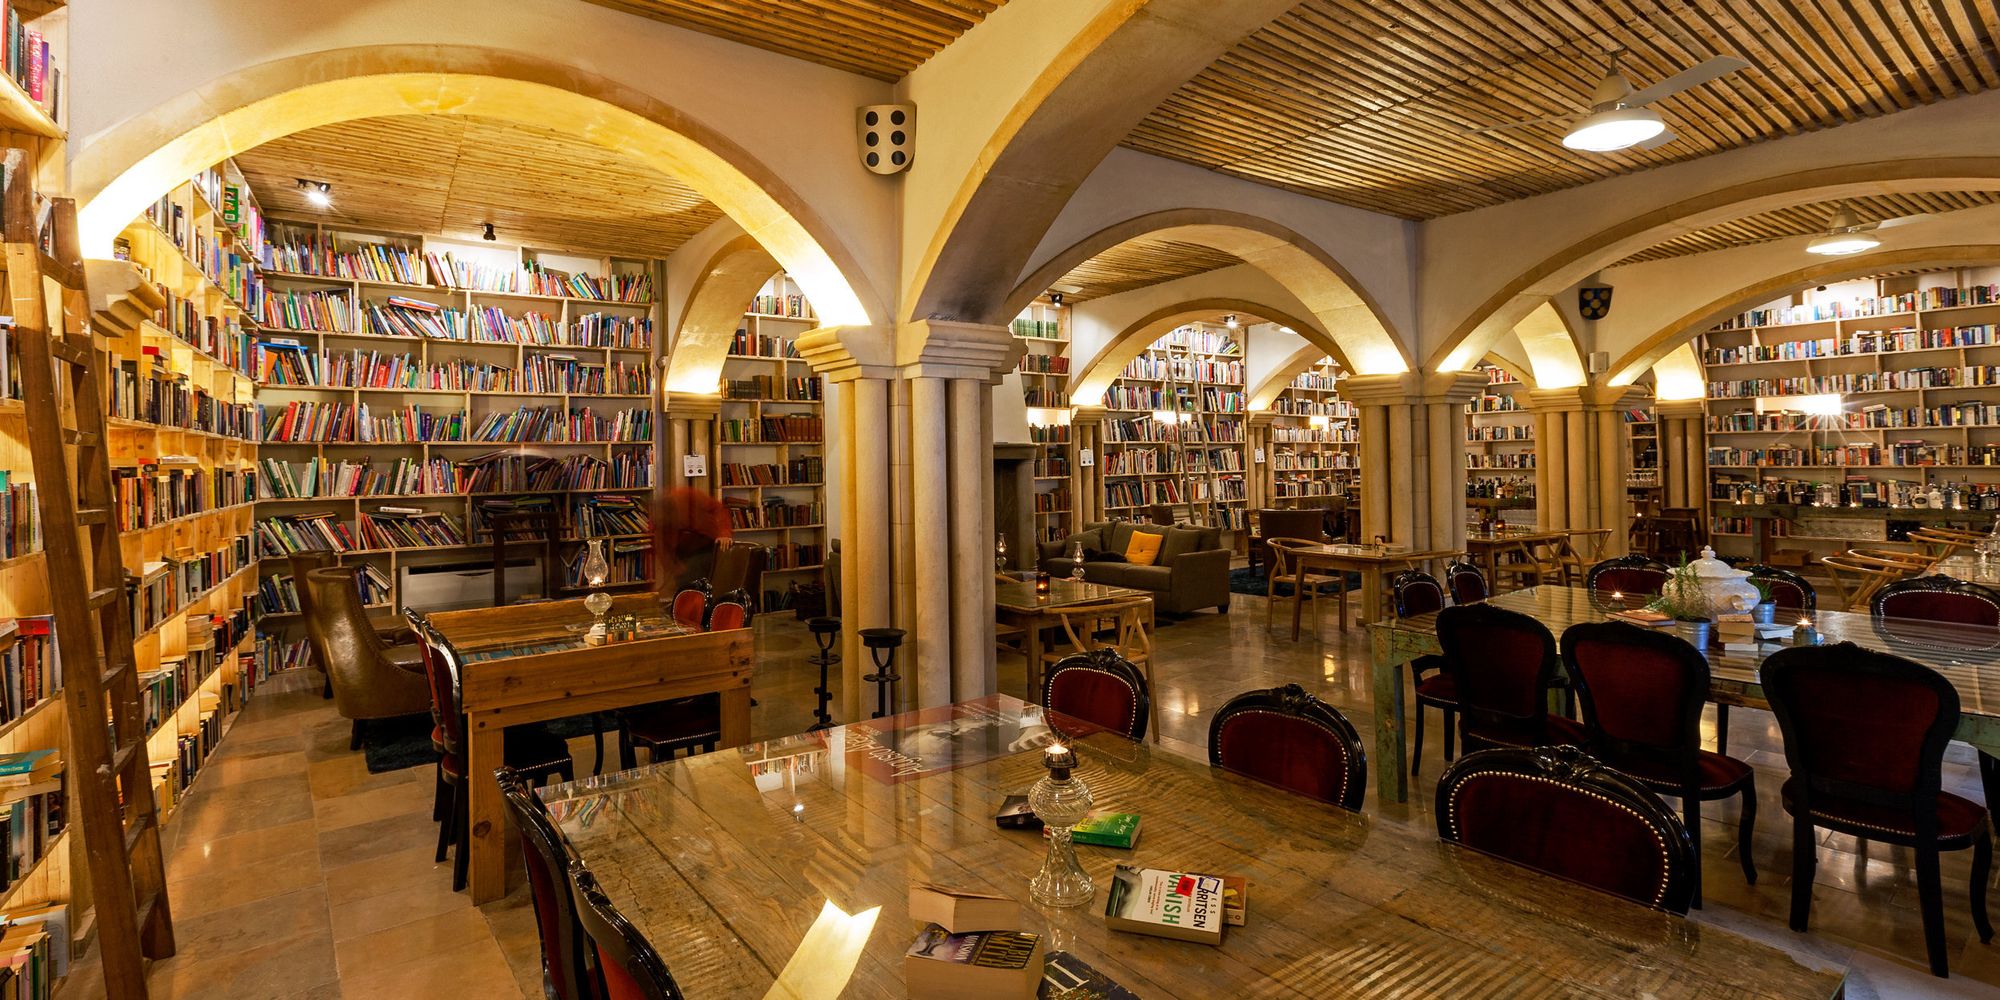 This Hotel With 50,000 Books Is A Literary Lover's Dream Come True